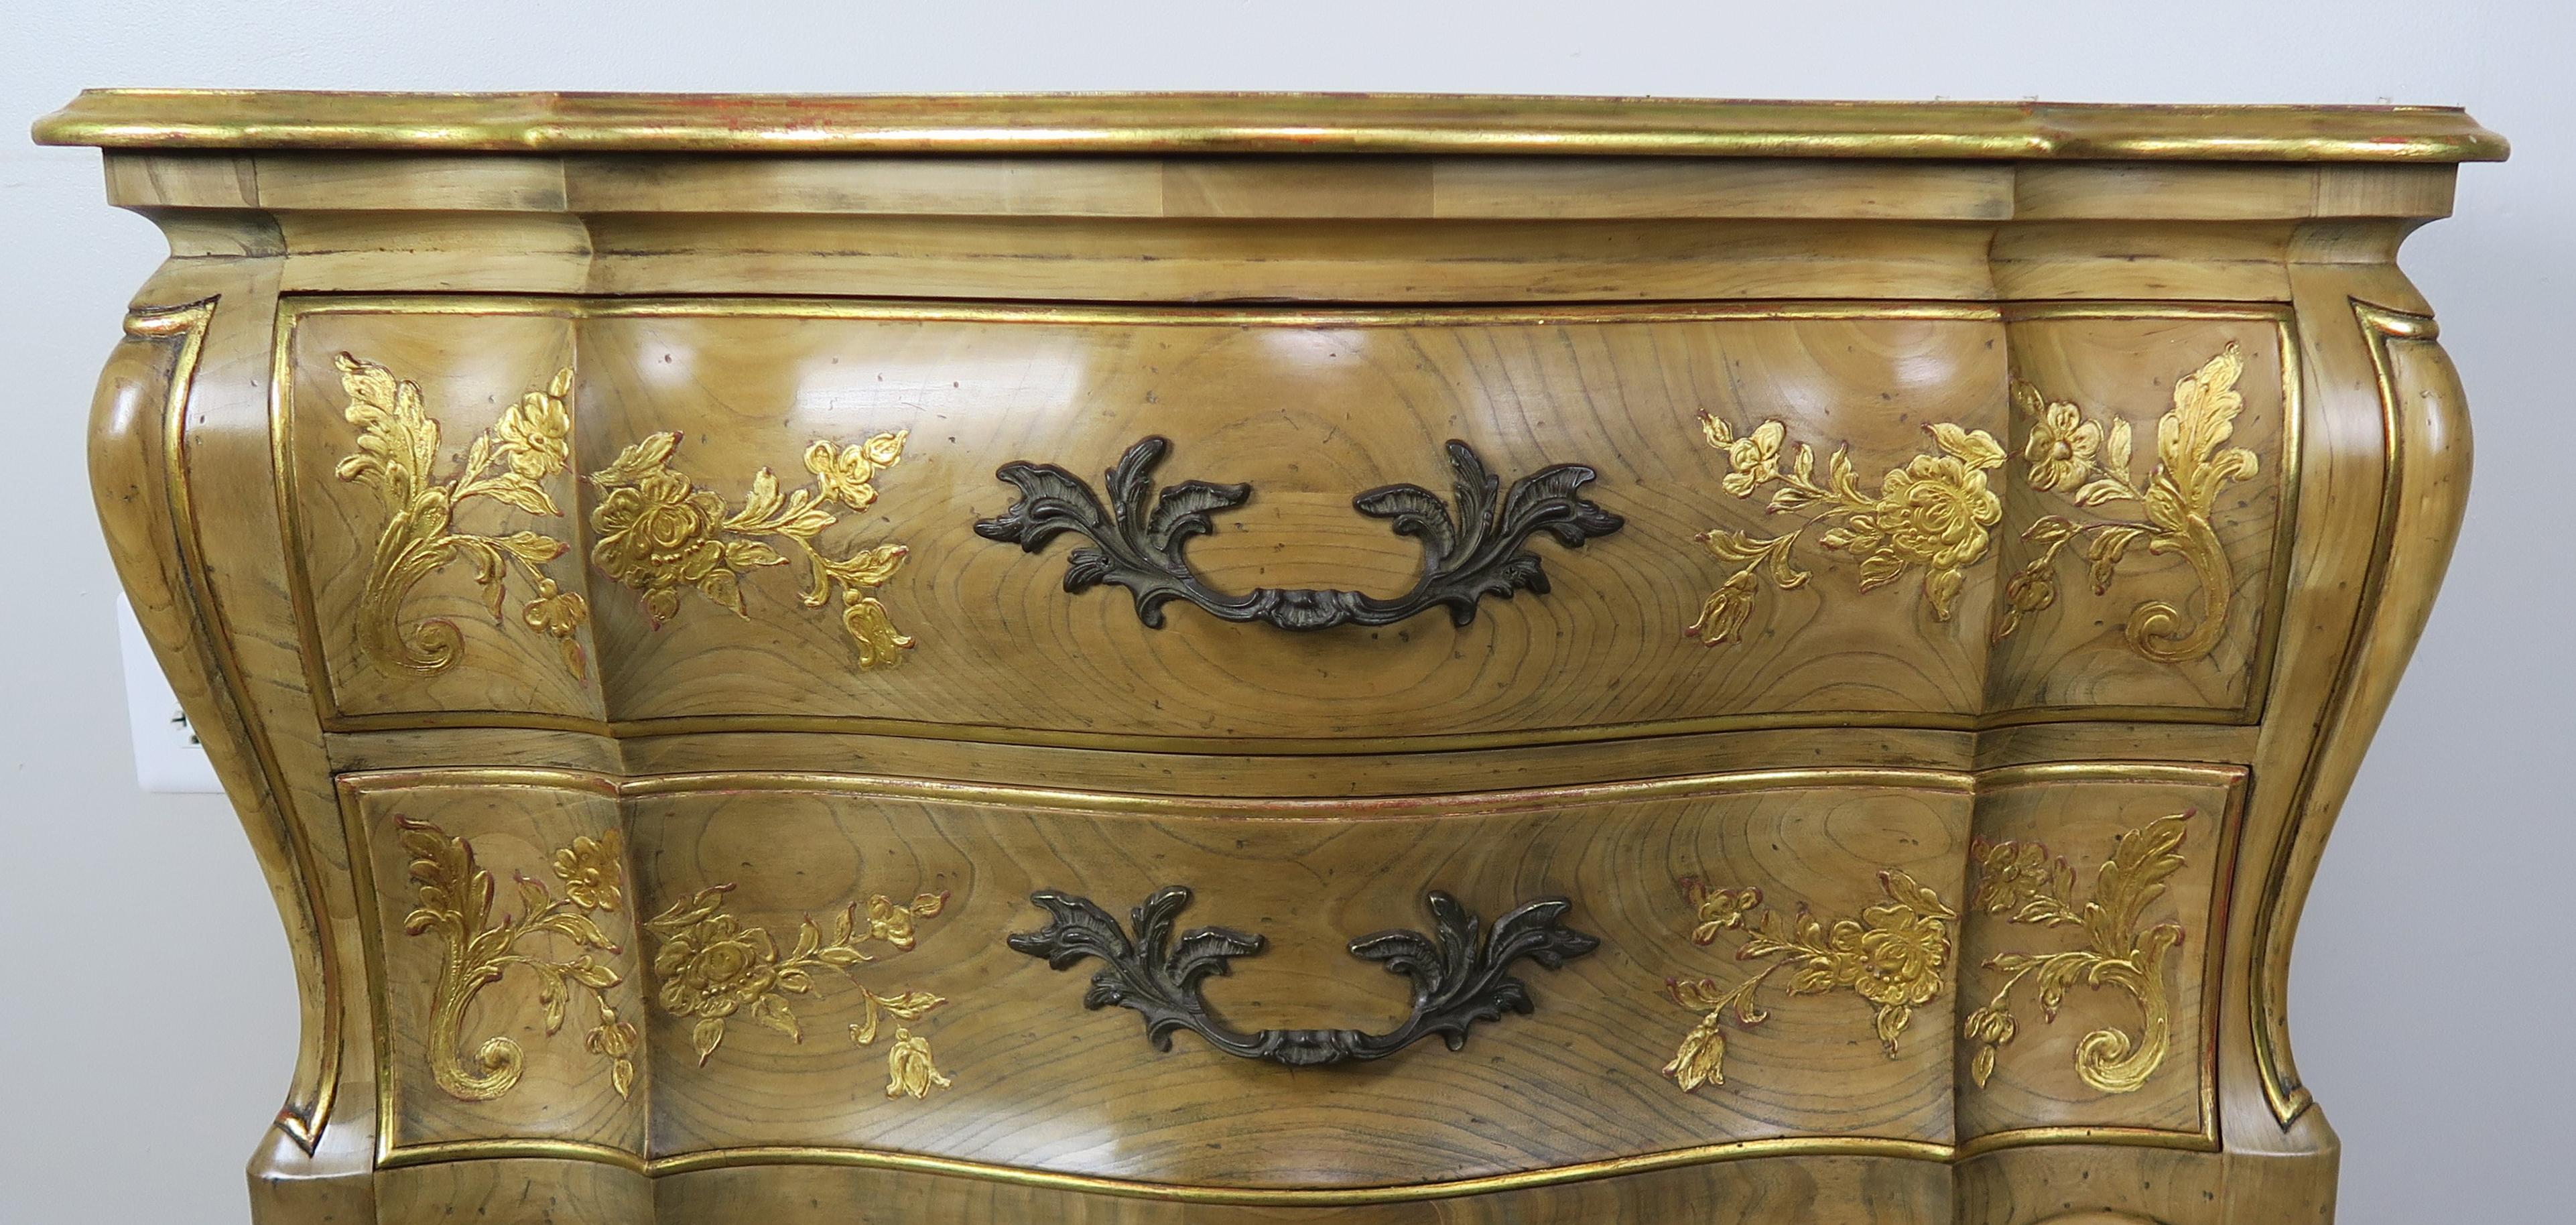 French two-drawer chest beautiful painted in a metallic gold chinoiserie depicting flowers throughout. The two drawer chest stands on four cabriole legs with a simple pad foot. The piece is made from elm and has beautiful raised chinoiserie painting